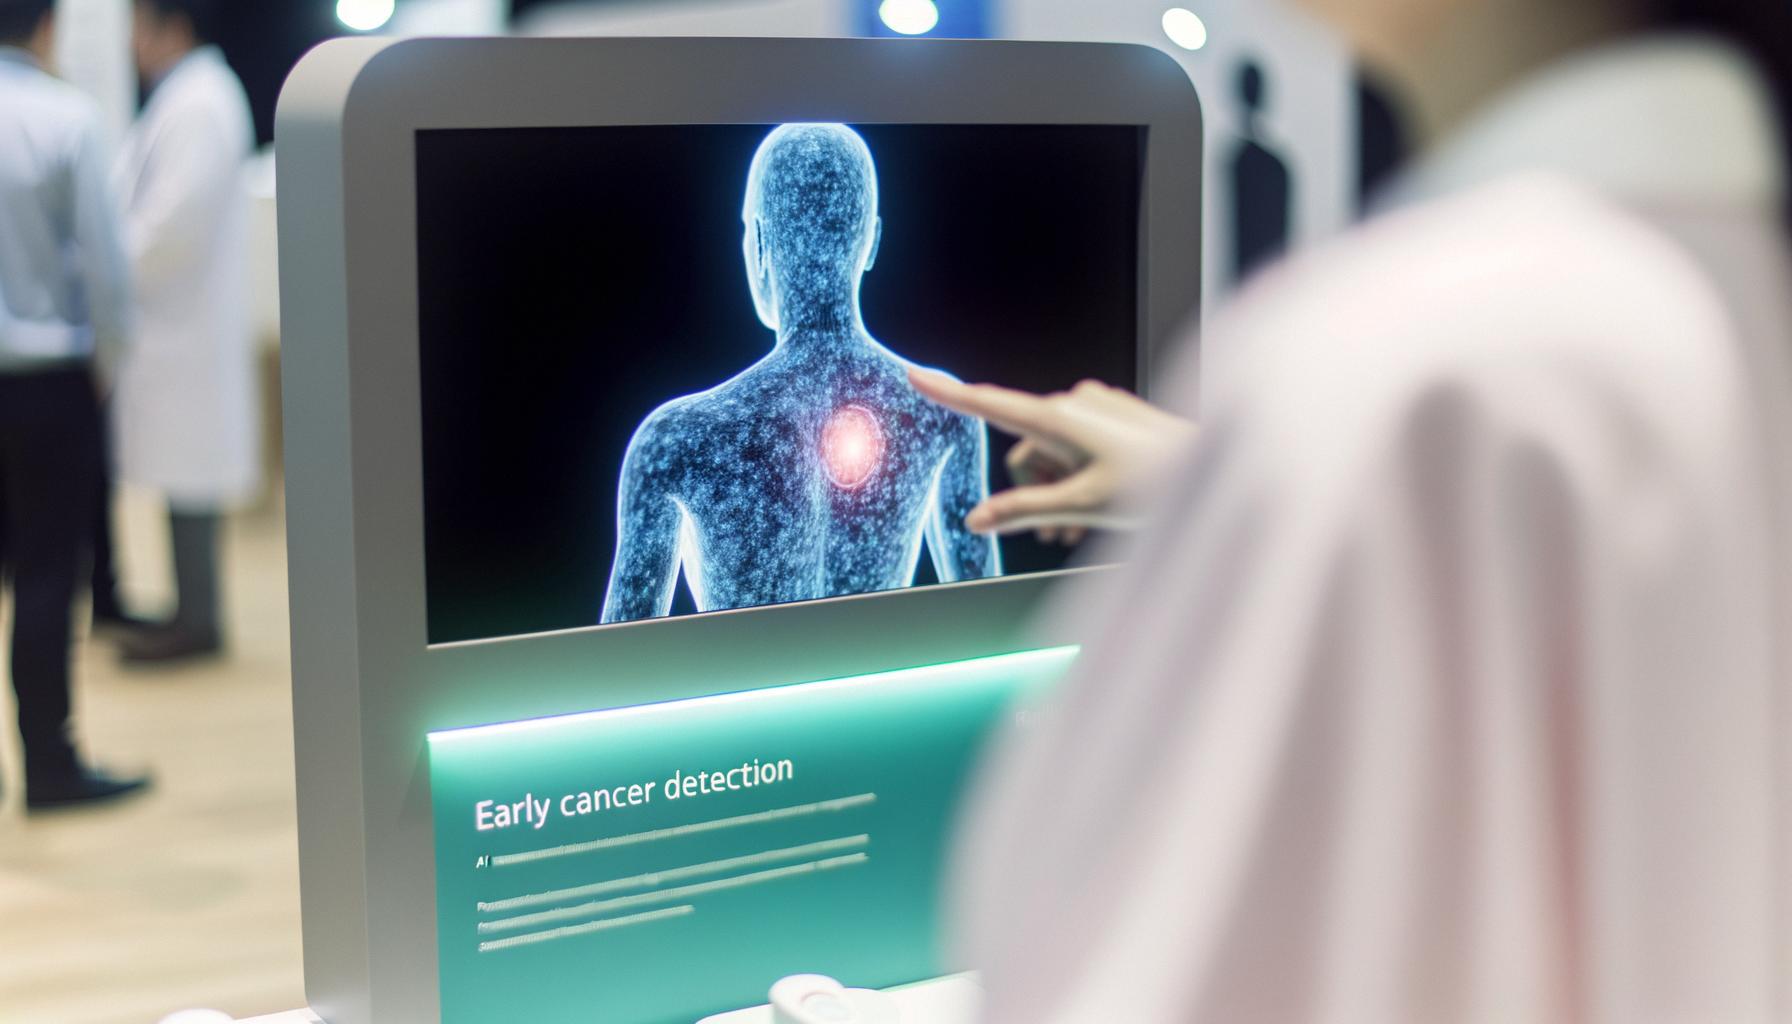 AI advancements are improving cancer detection and personalized treatment approaches.